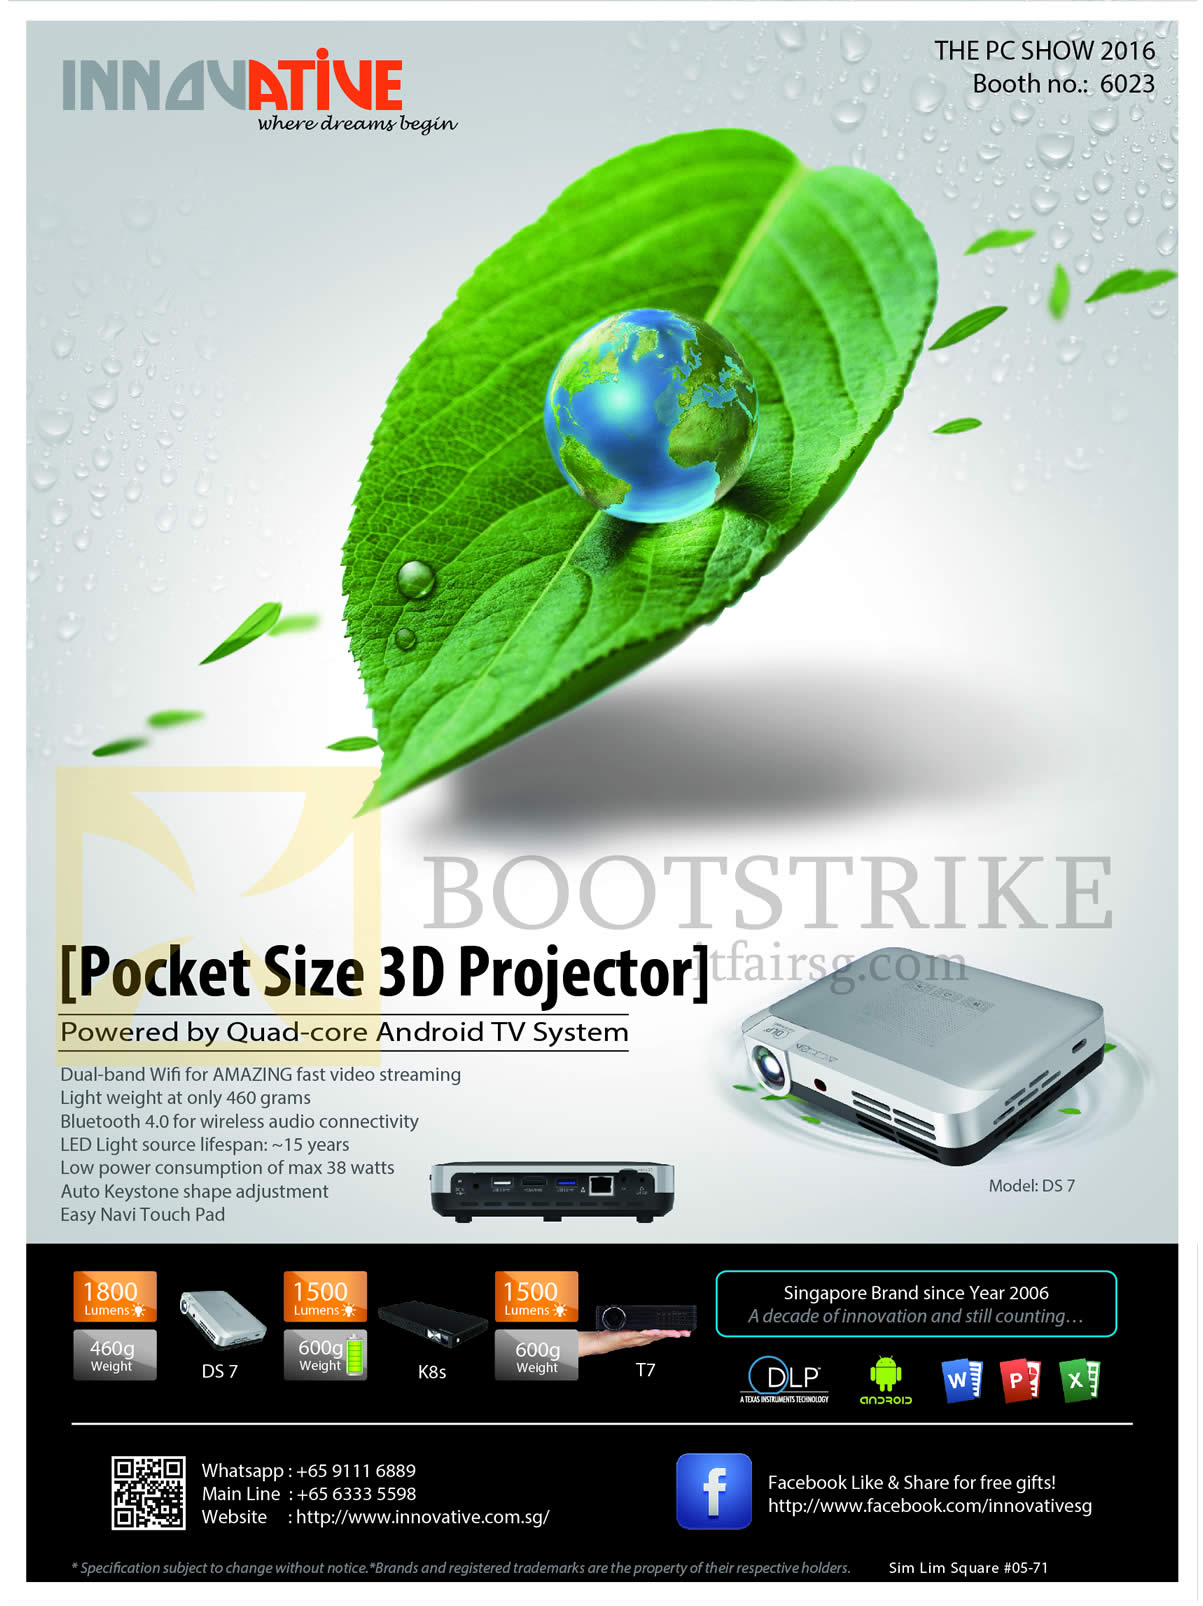 PC SHOW 2016 price list image brochure of Innovative DS 7 Projector